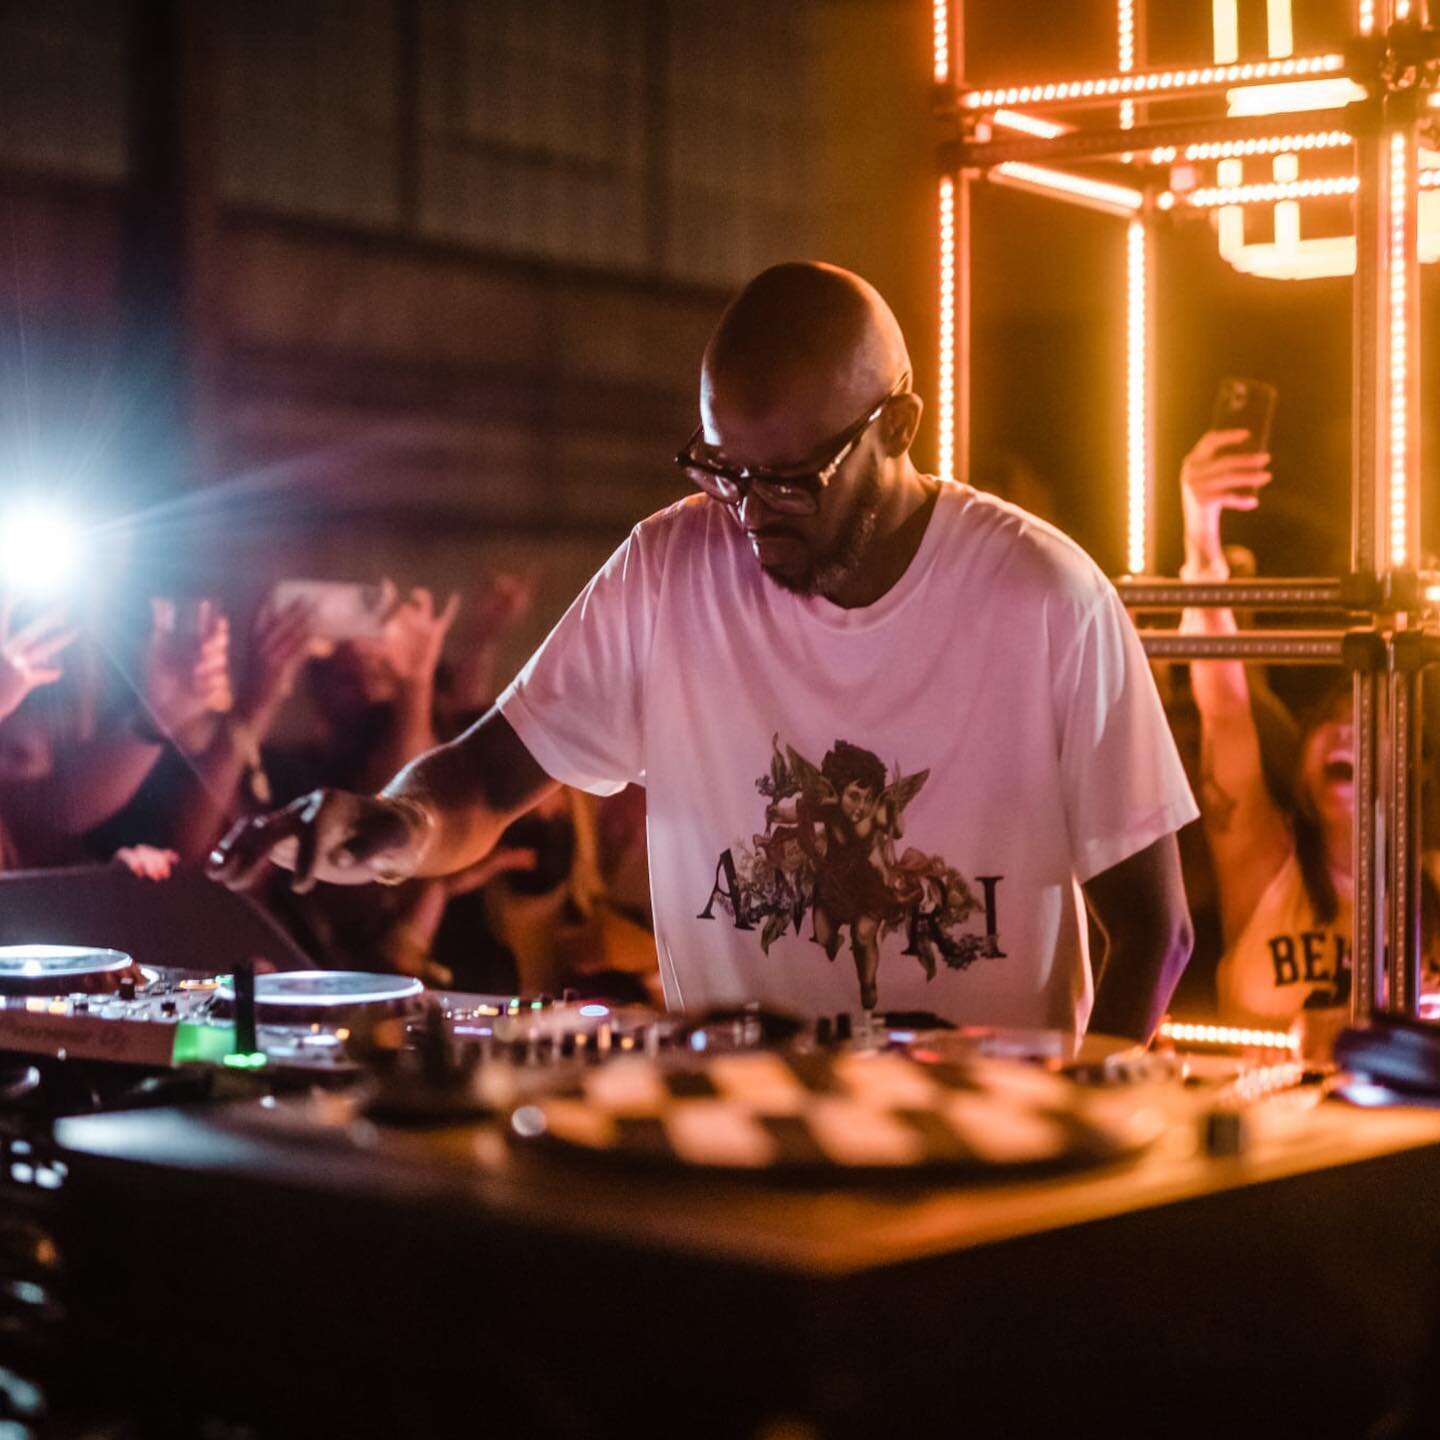 Black Coffee returns to Oakland on Saturday, May 13th! Day to night outdoor event at Frank Ogawa Plaza :) Grab your presales at www.prismatictracks.com

#realblackcoffee #blockparty #townbiz #housemusic #housemusicallday #oaklandevents #daypartyalert